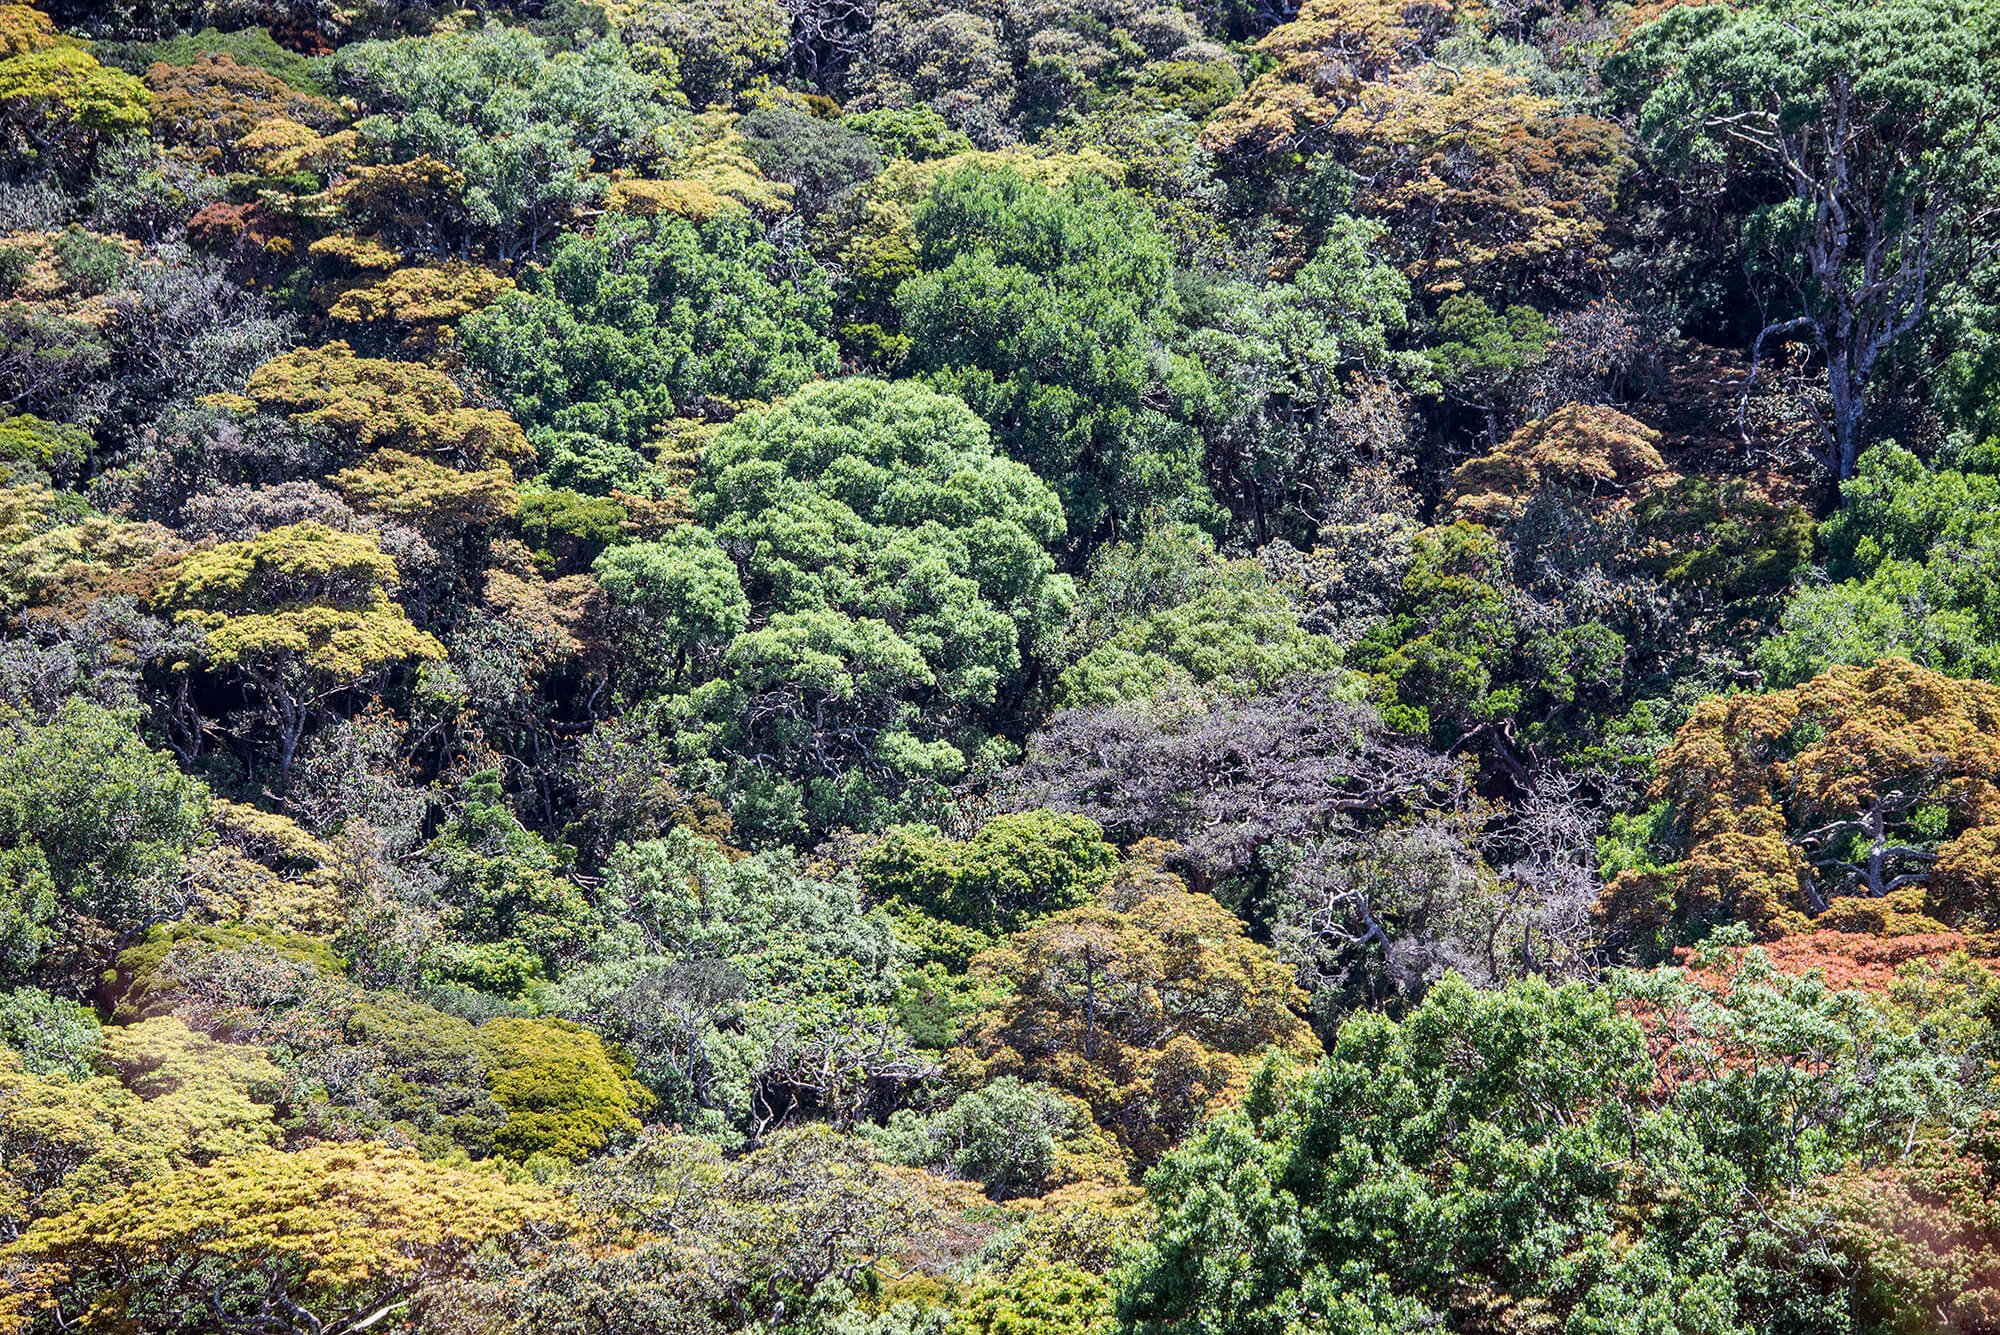 Horton Plains National Park, located in the central highlands of Sri Lanka